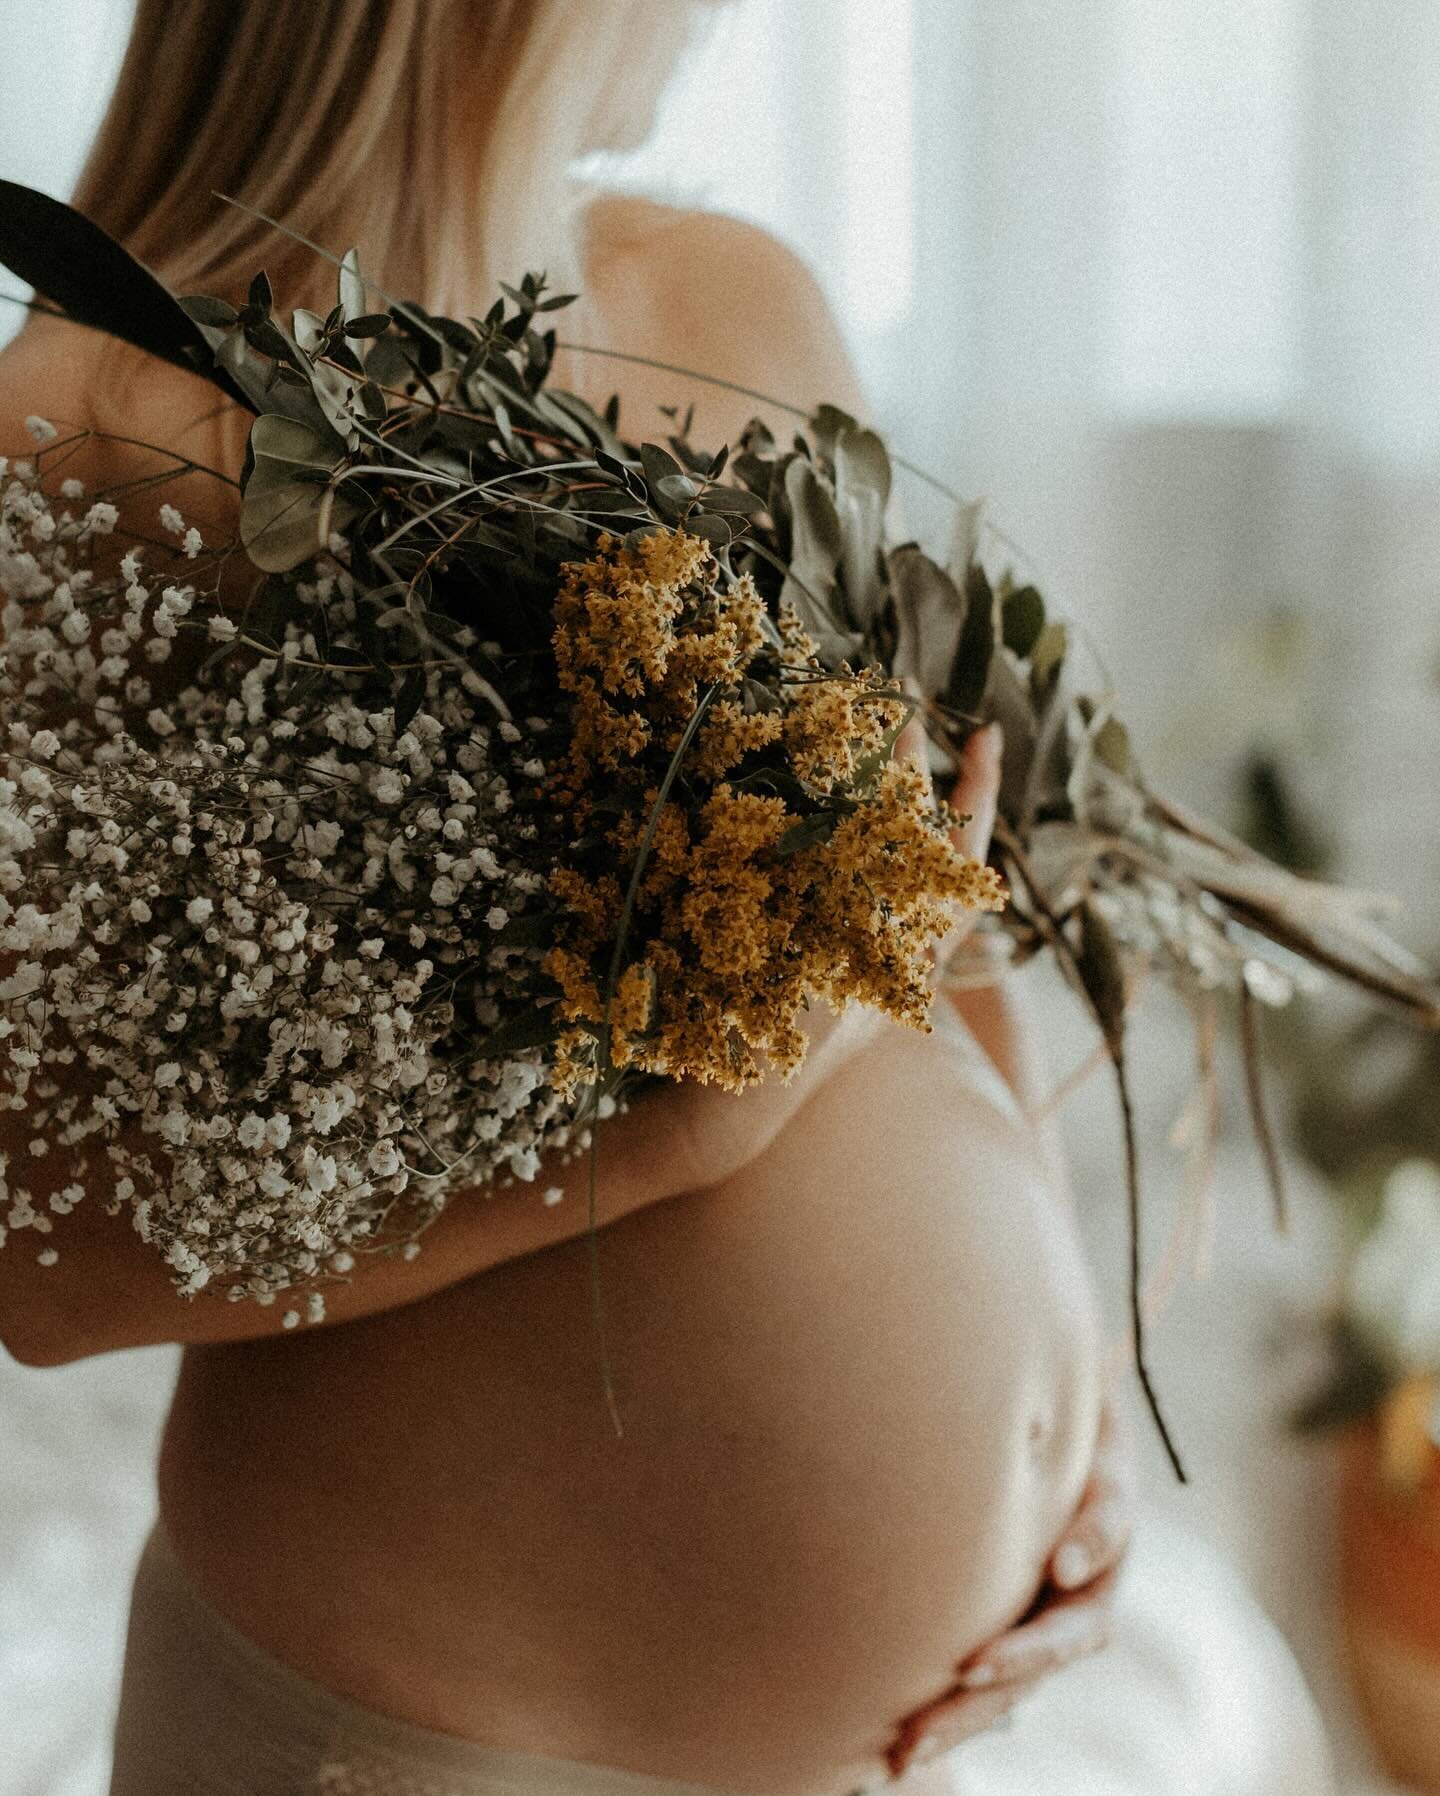 I often hear women say they aren&rsquo;t comfortable doing maternity photos because they feel unattractive during their pregnancies. I promise I get it- I&rsquo;ve been there and yes you don&rsquo;t always feel glamorous or even like yourself. But it